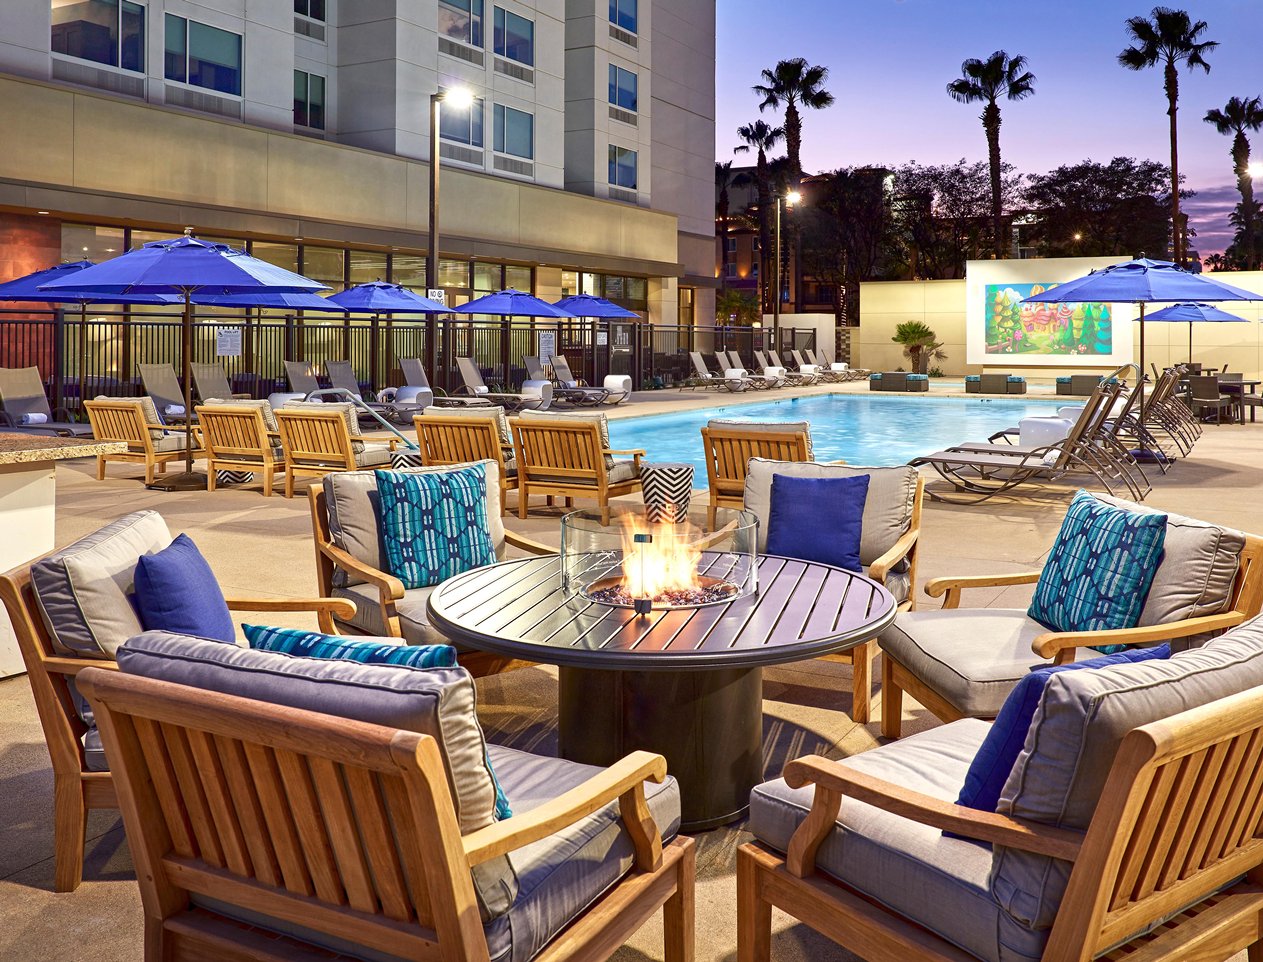 A sunset view of the pool area of the Cambria Hotel & Suites Anaheim Resort at a firepit table